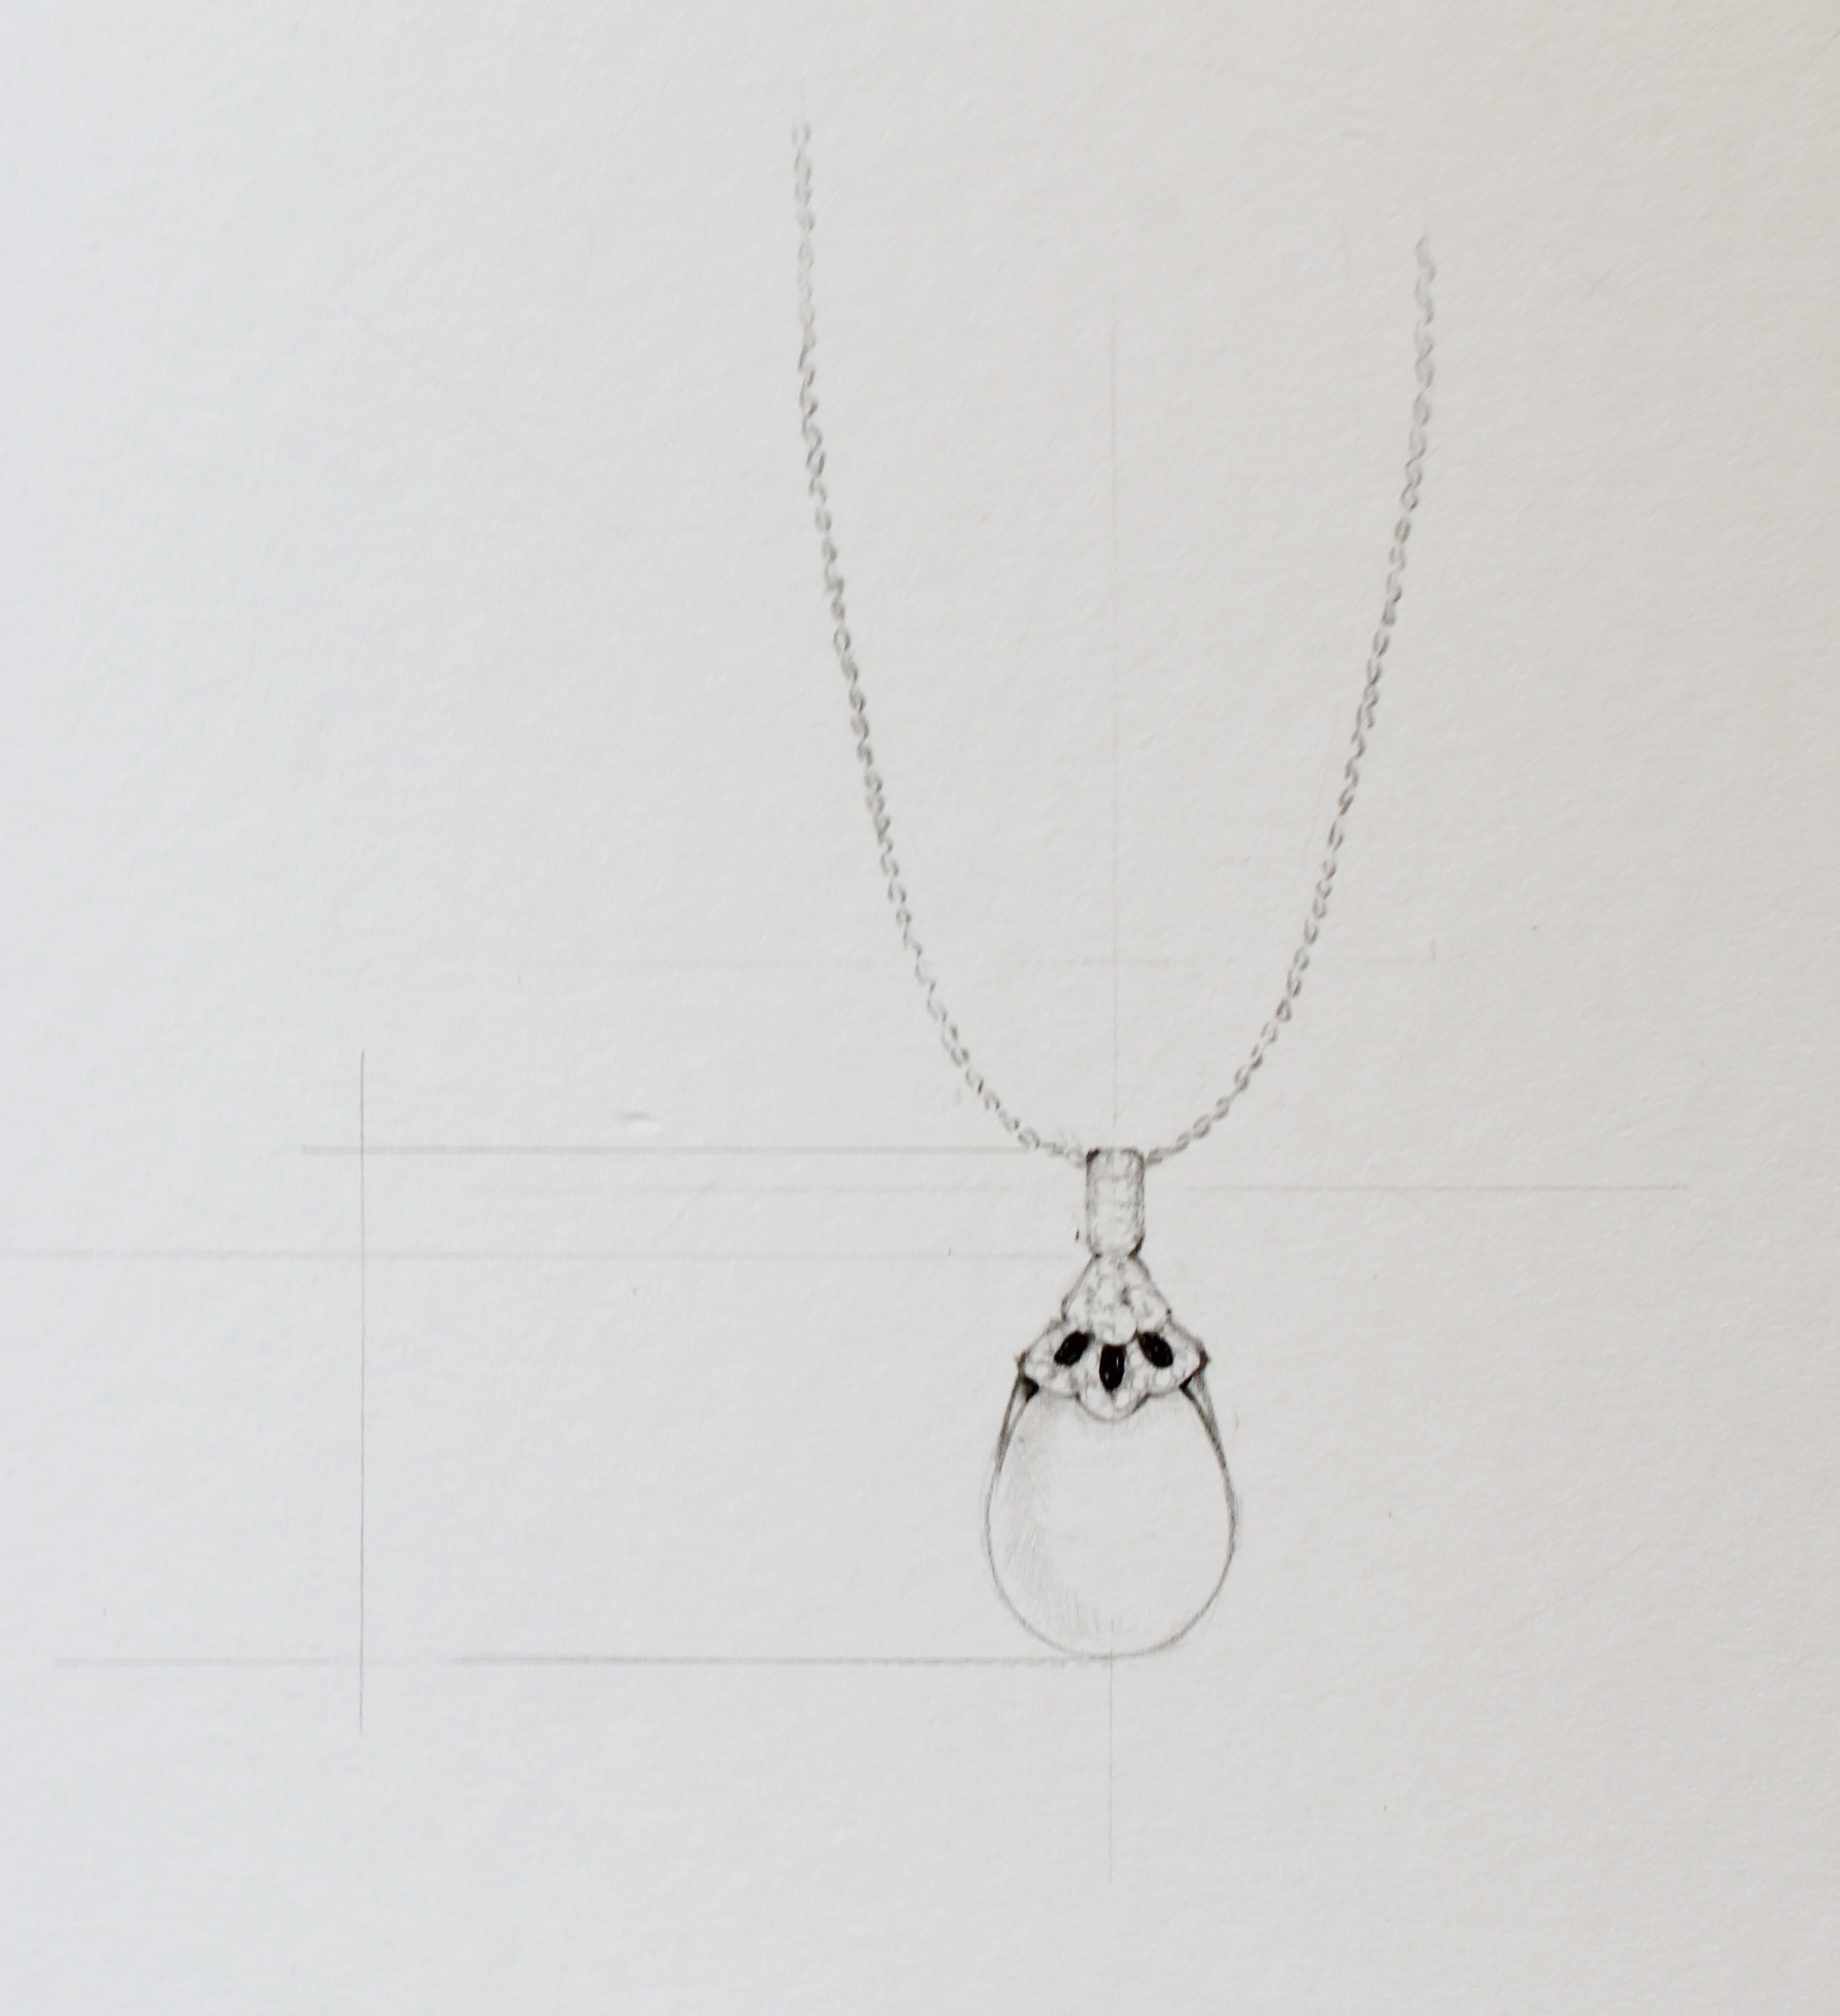 Drawing necklace step 5